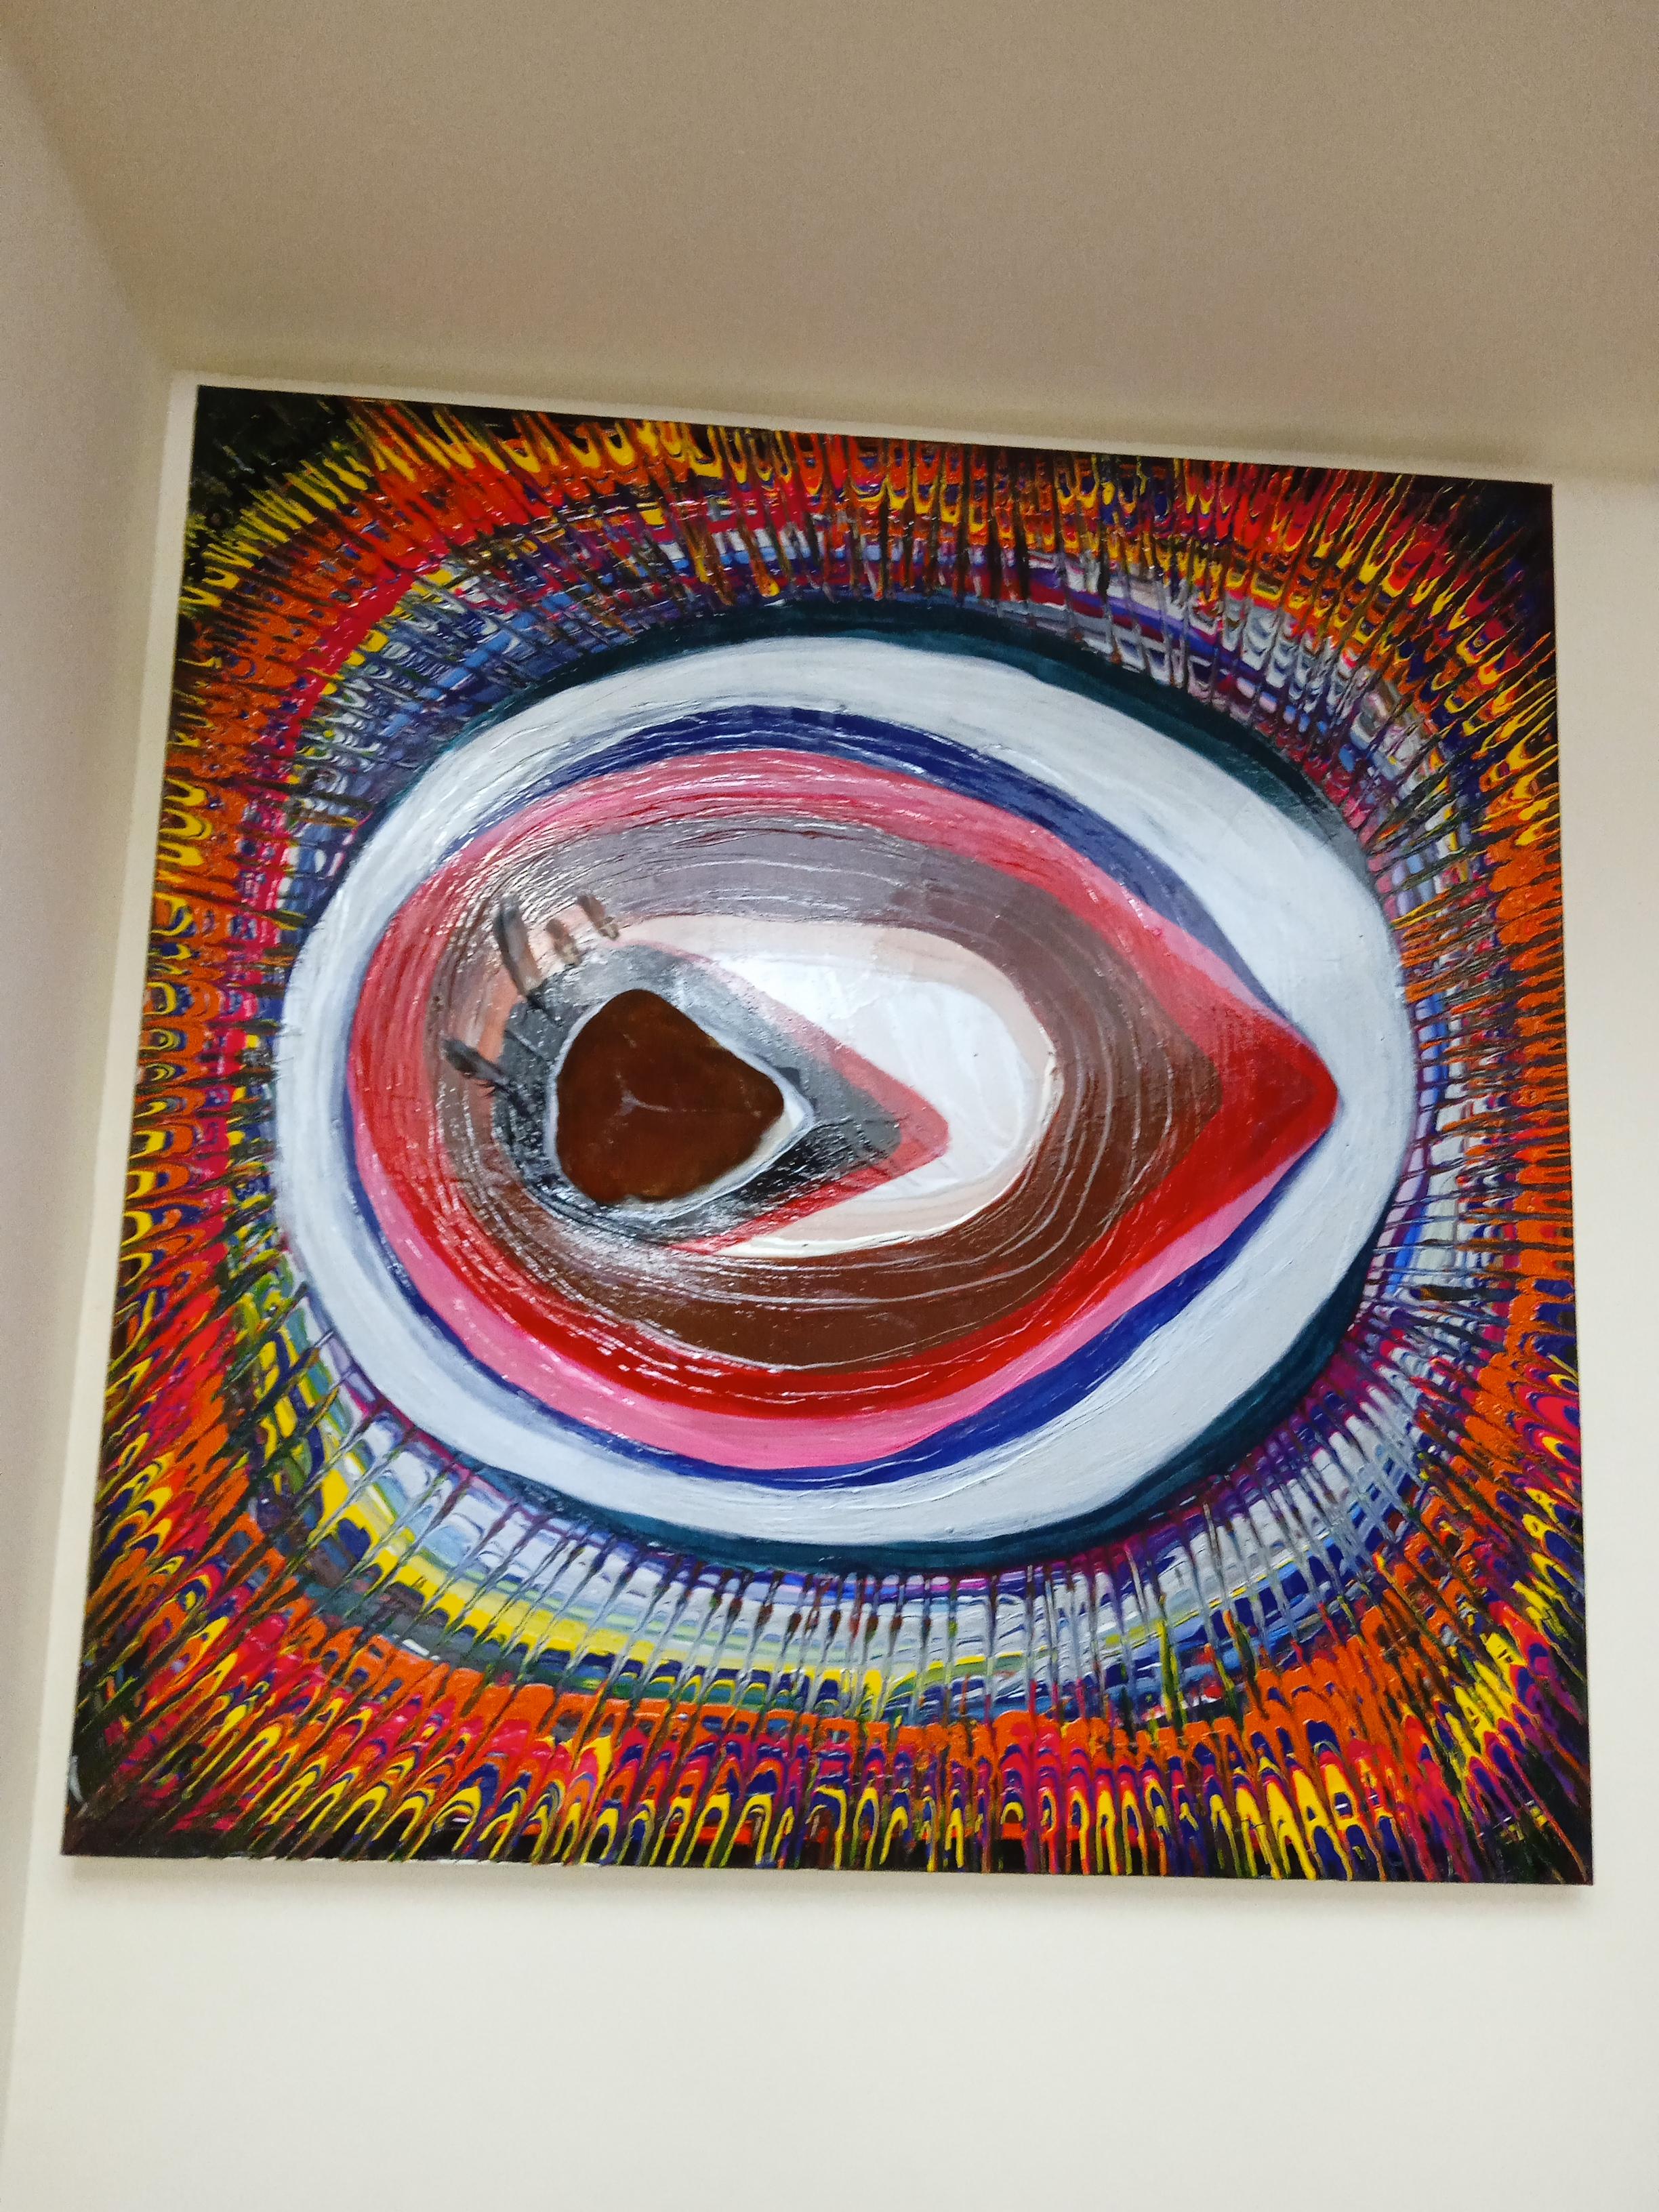 The amber eye - Abstract Expressionist Mixed Media Art by Mercy akowe 